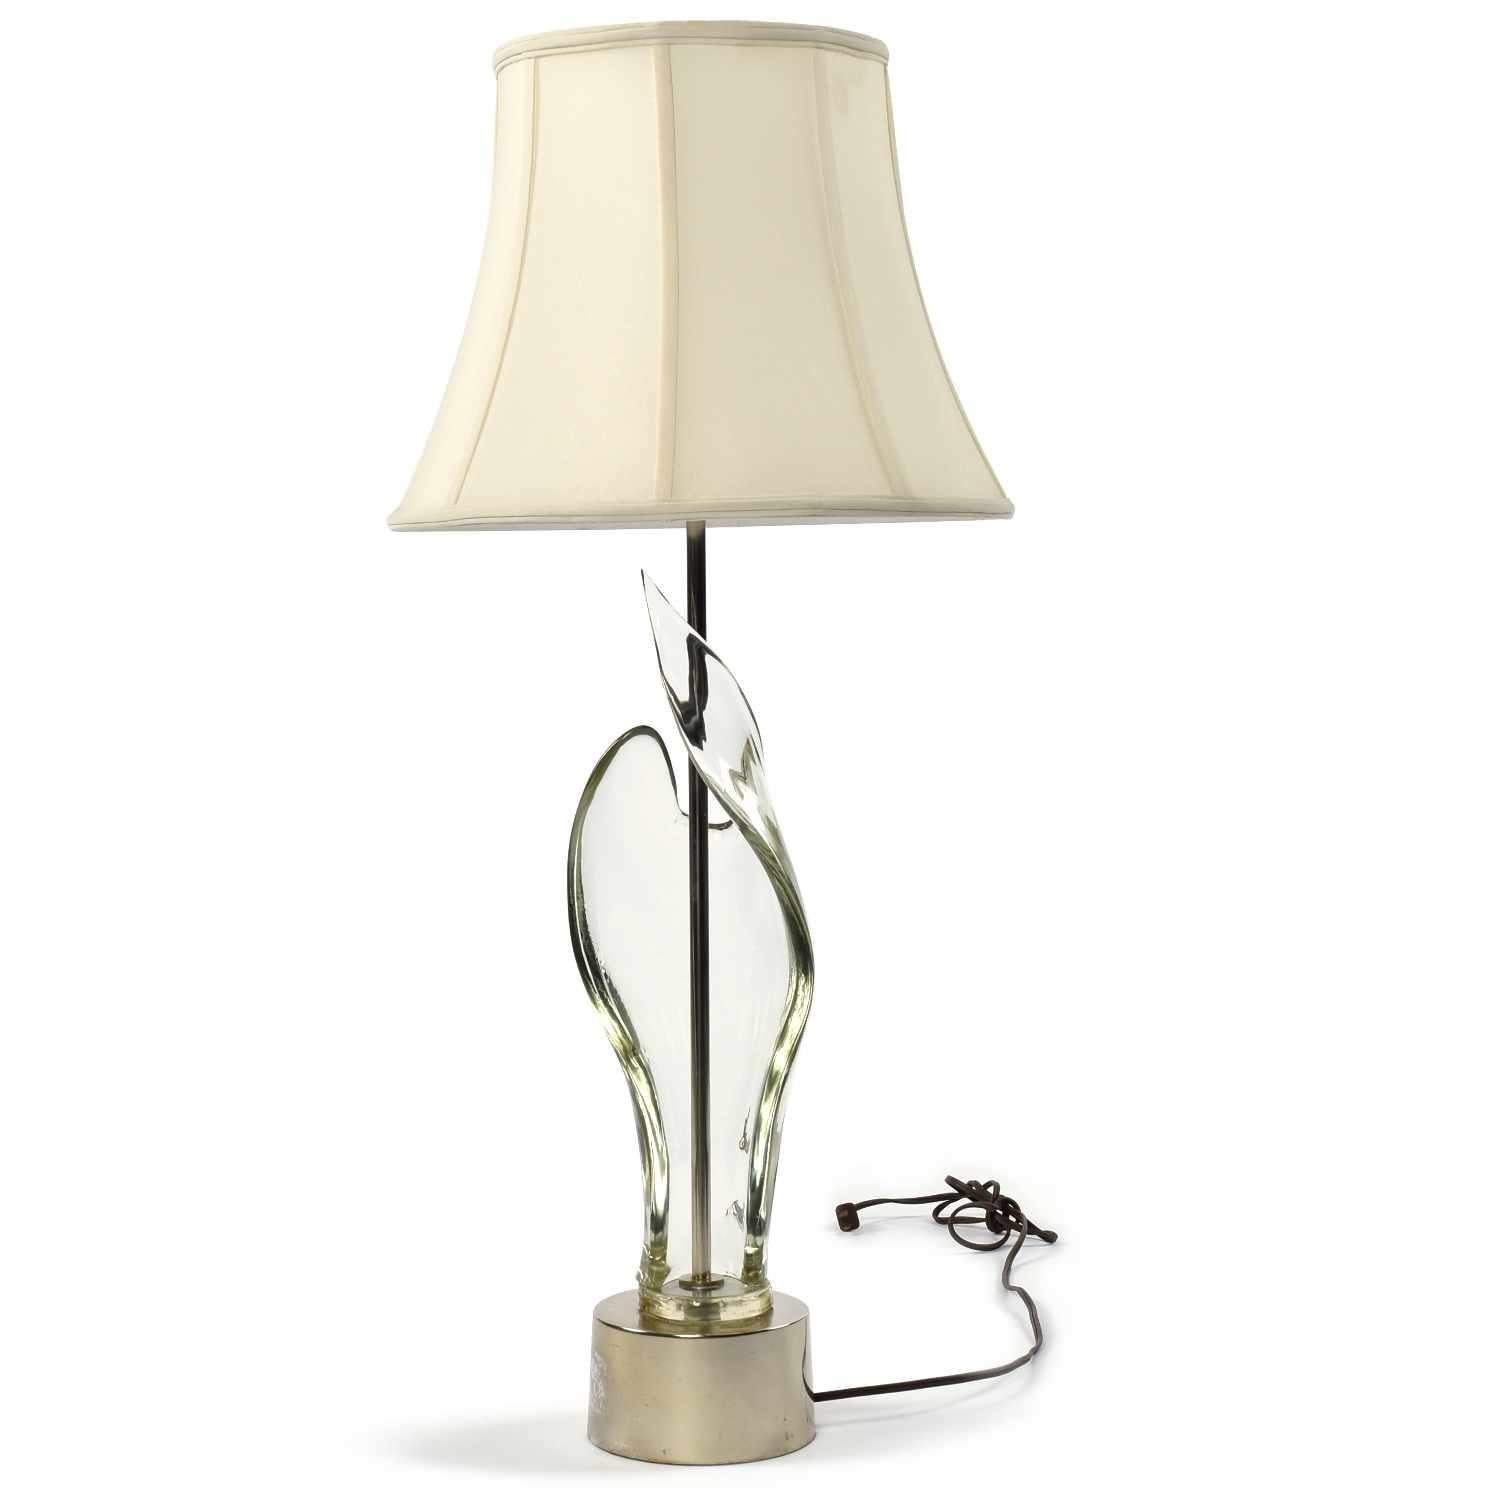 Late 20th Century Mid-Century Modern Sculptural Clear Murano Glass Table Lamp For Sale